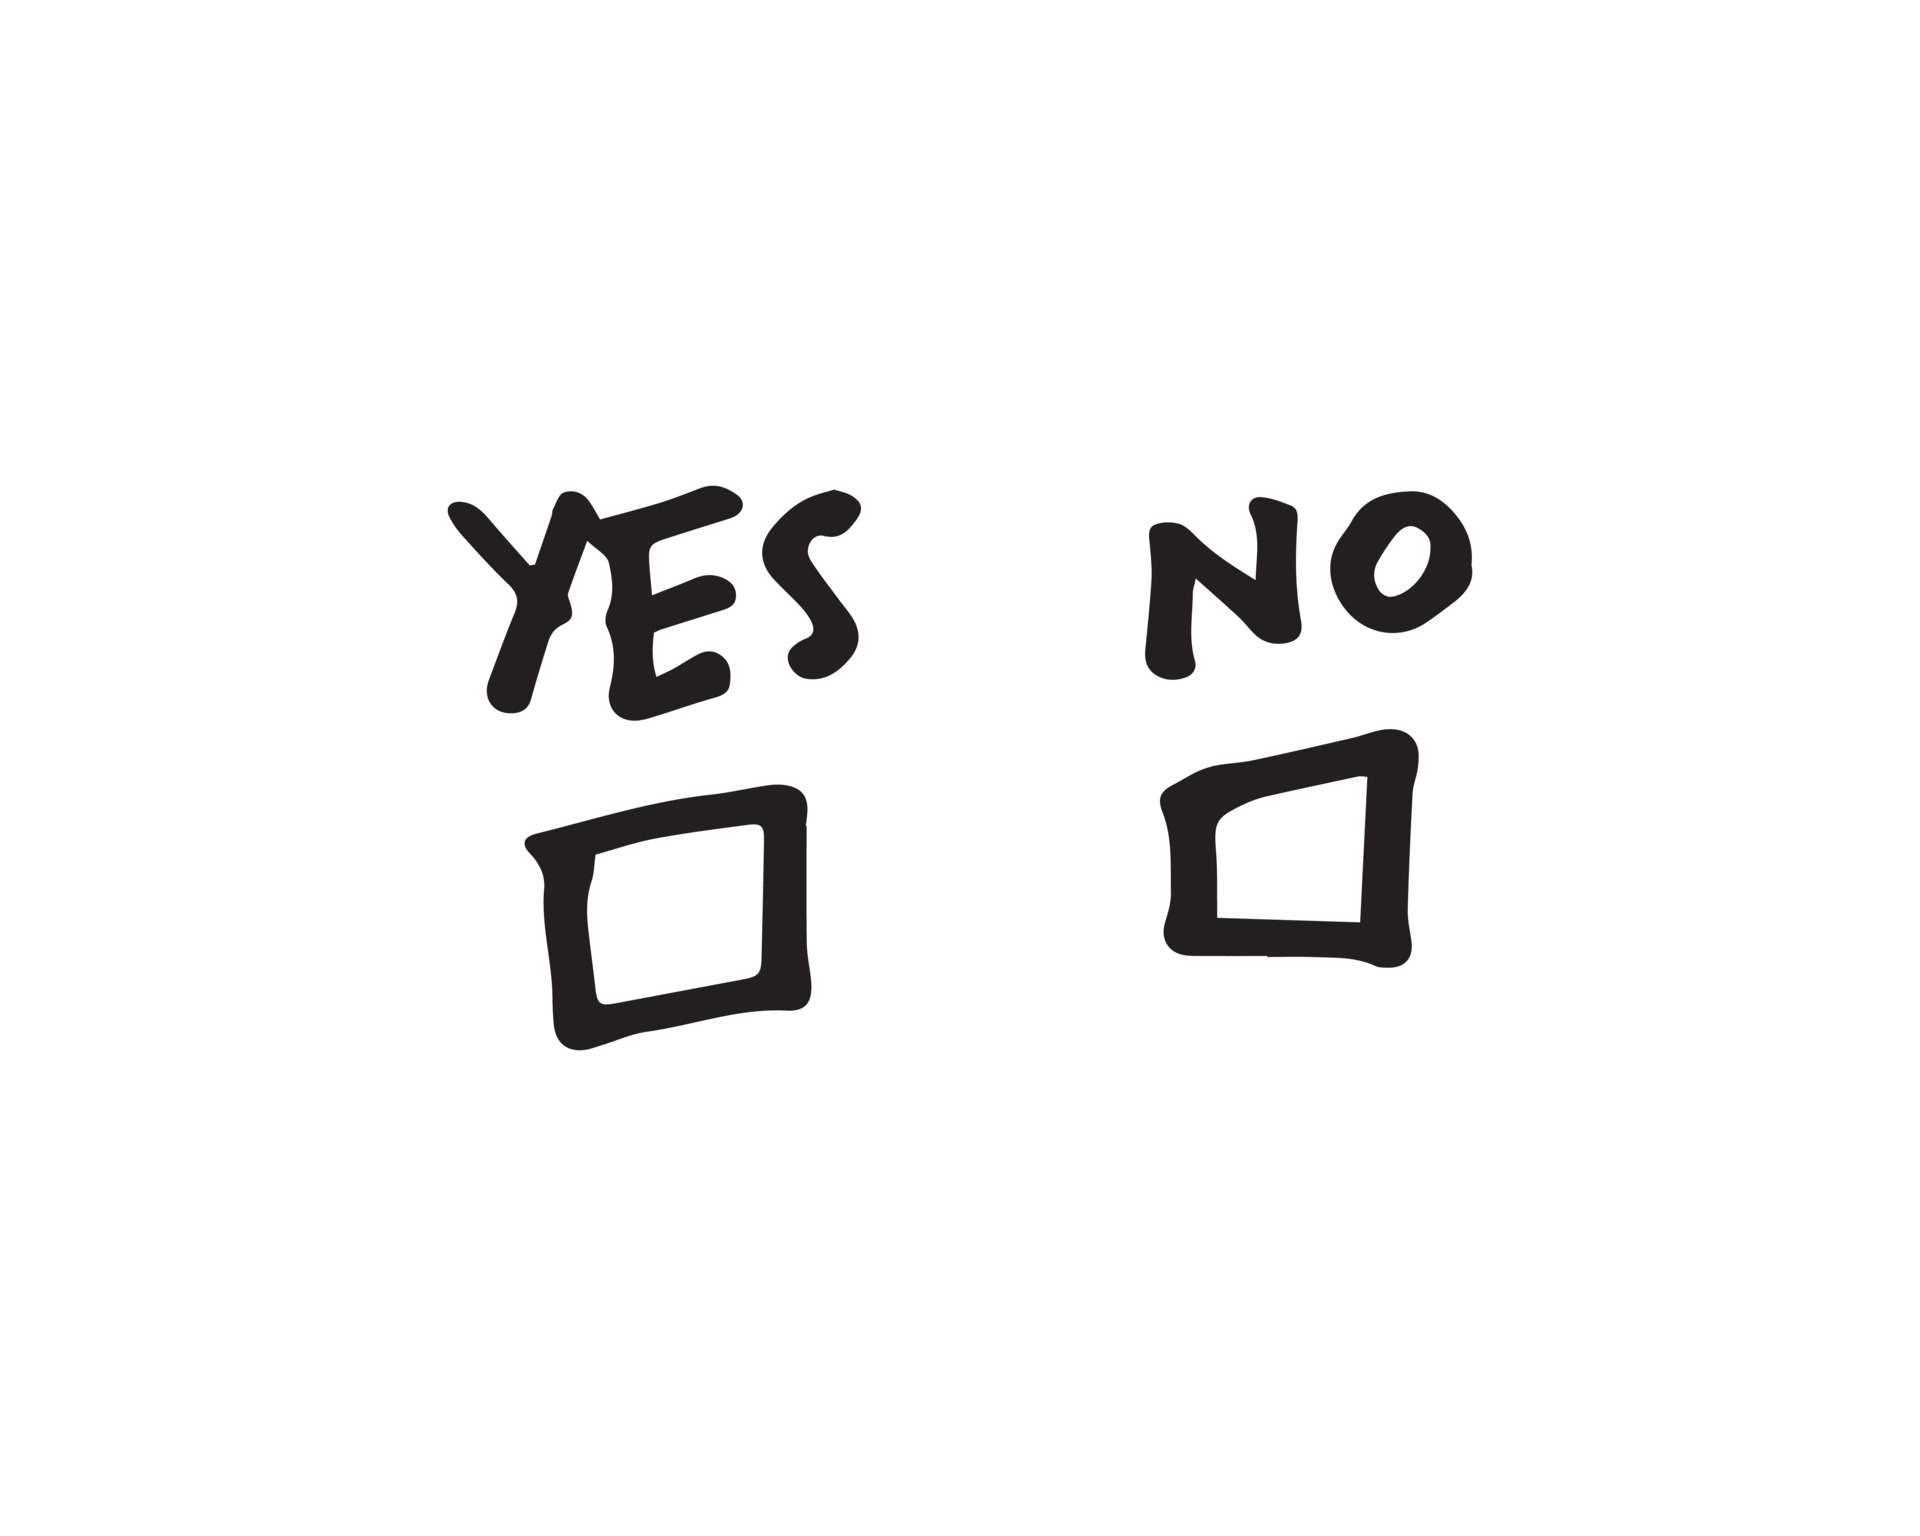 https://static.vecteezy.com/system/resources/previews/004/682/313/original/yes-or-no-with-a-checked-box-underneath-choices-box-illustration-that-is-drawn-in-graphics-a-simple-hand-drawn-drawing-free-vector.jpg